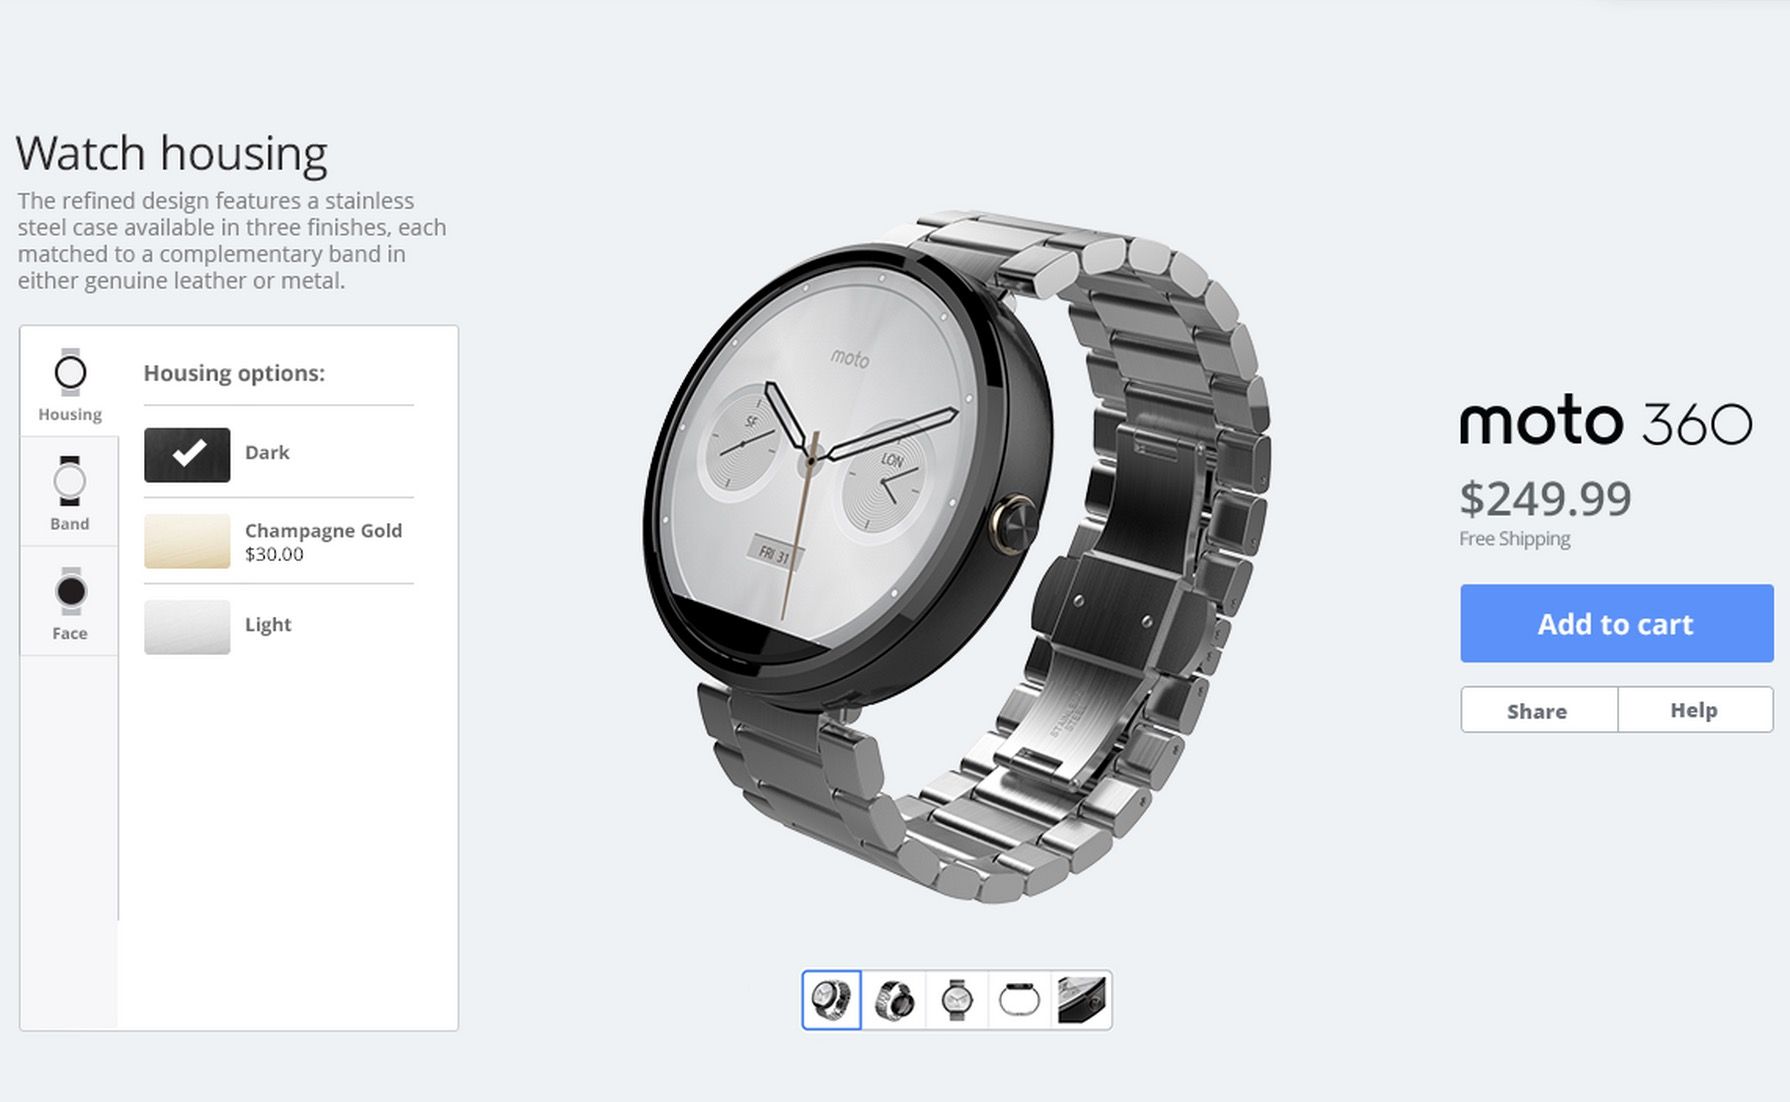 jony ive certainly won t like this new moto maker to add design options for moto 360 image 1